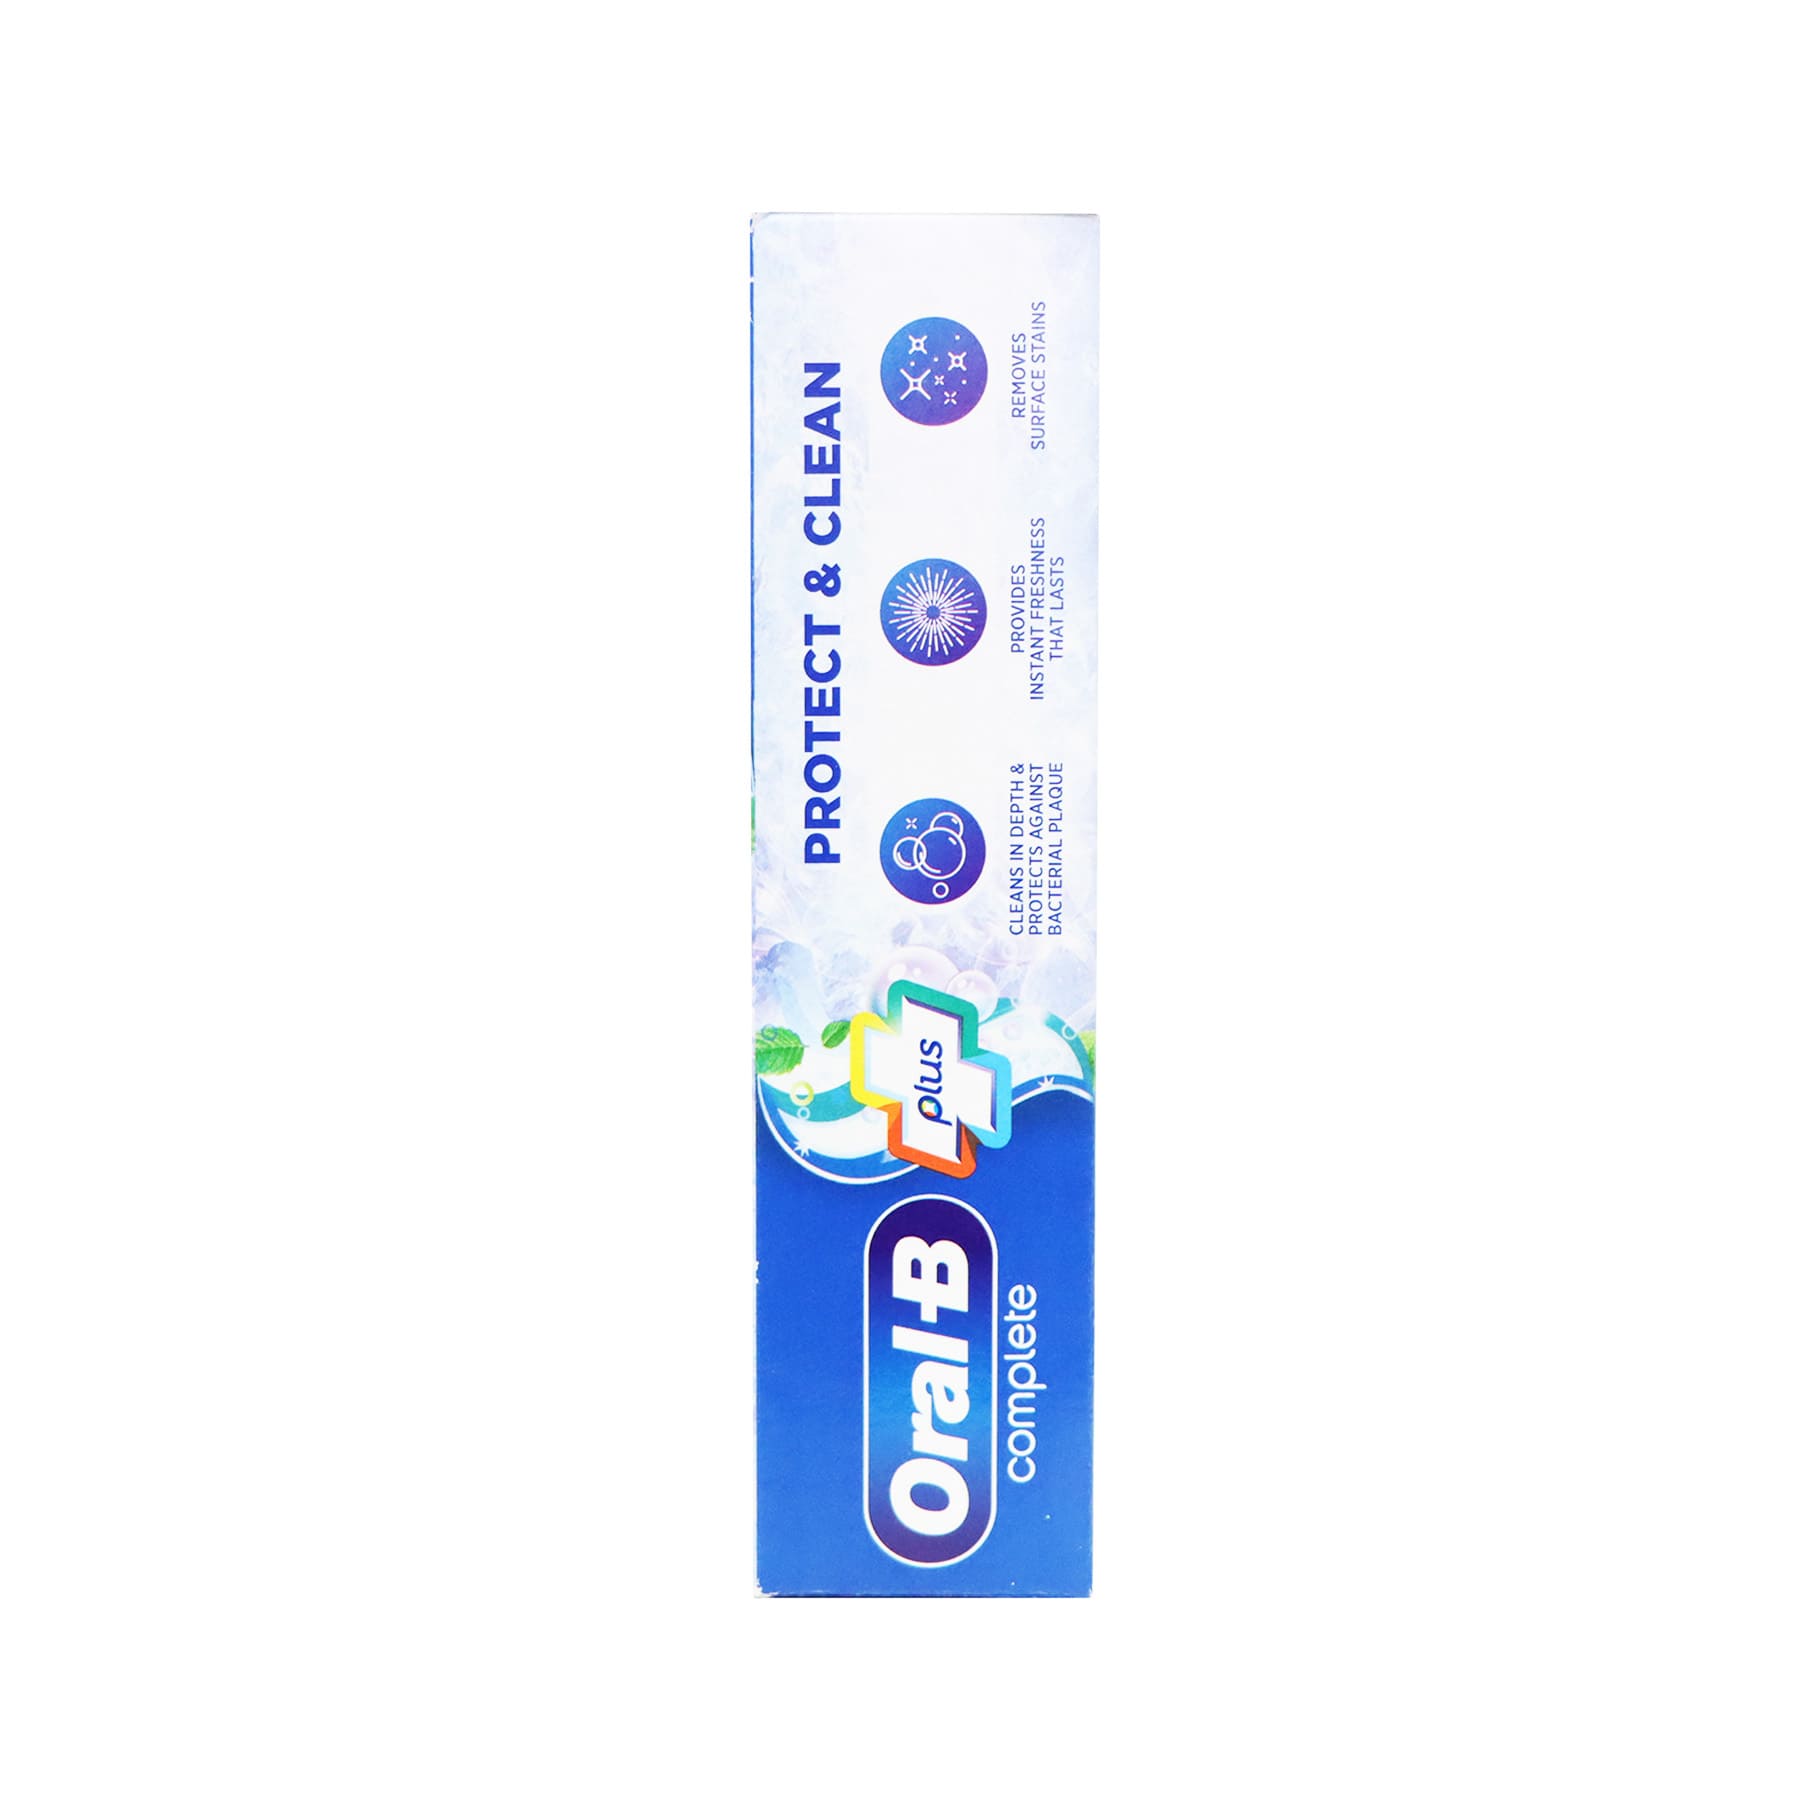 Oral-B Complete Plus Protect & Clean Toothpaste 75ml x 2